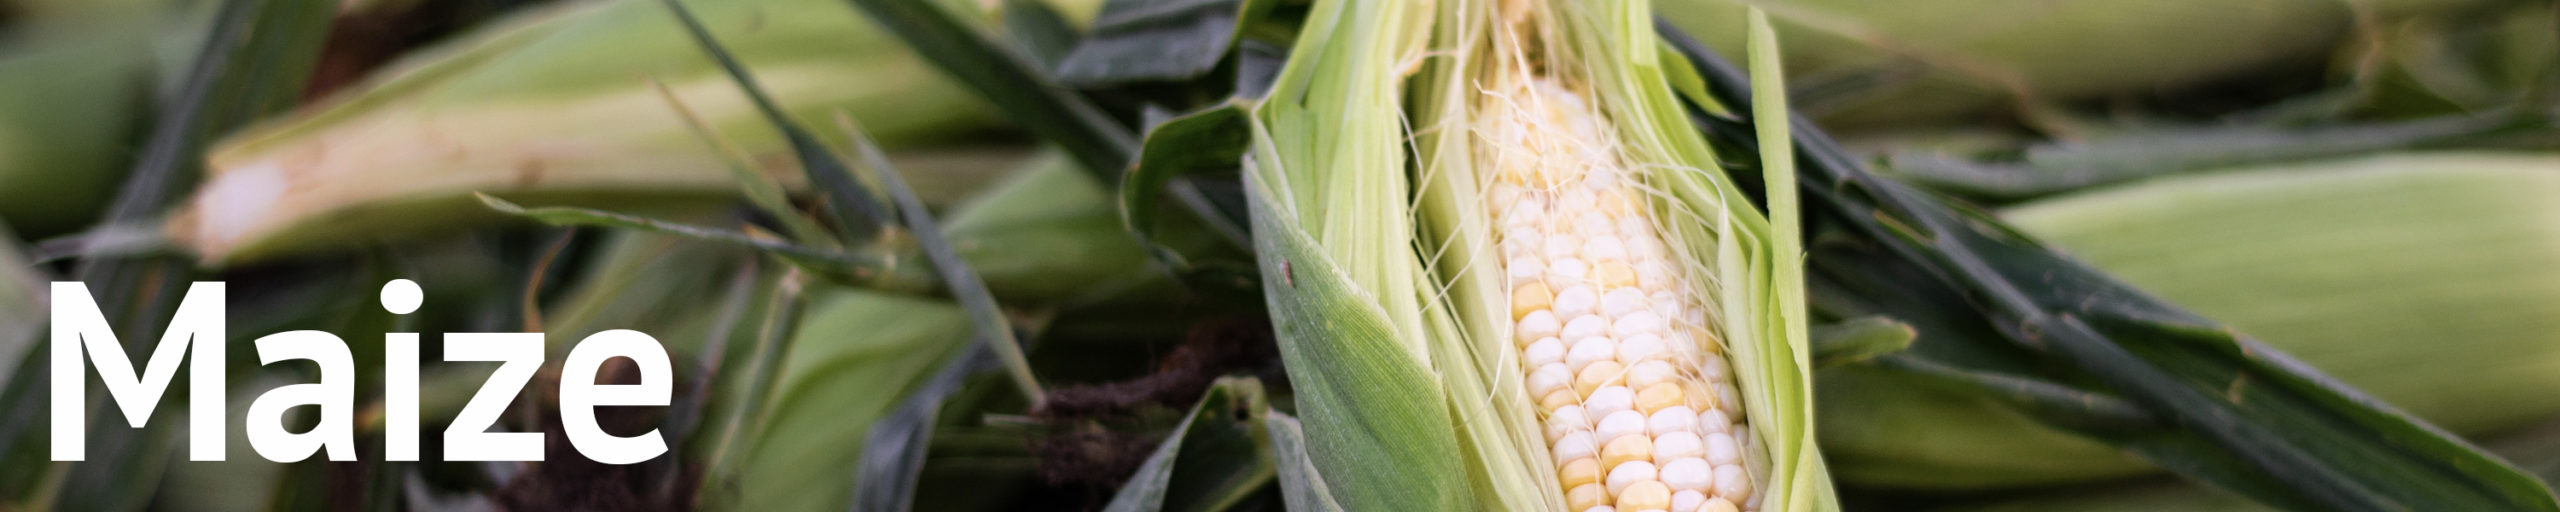 Banner image of maize.